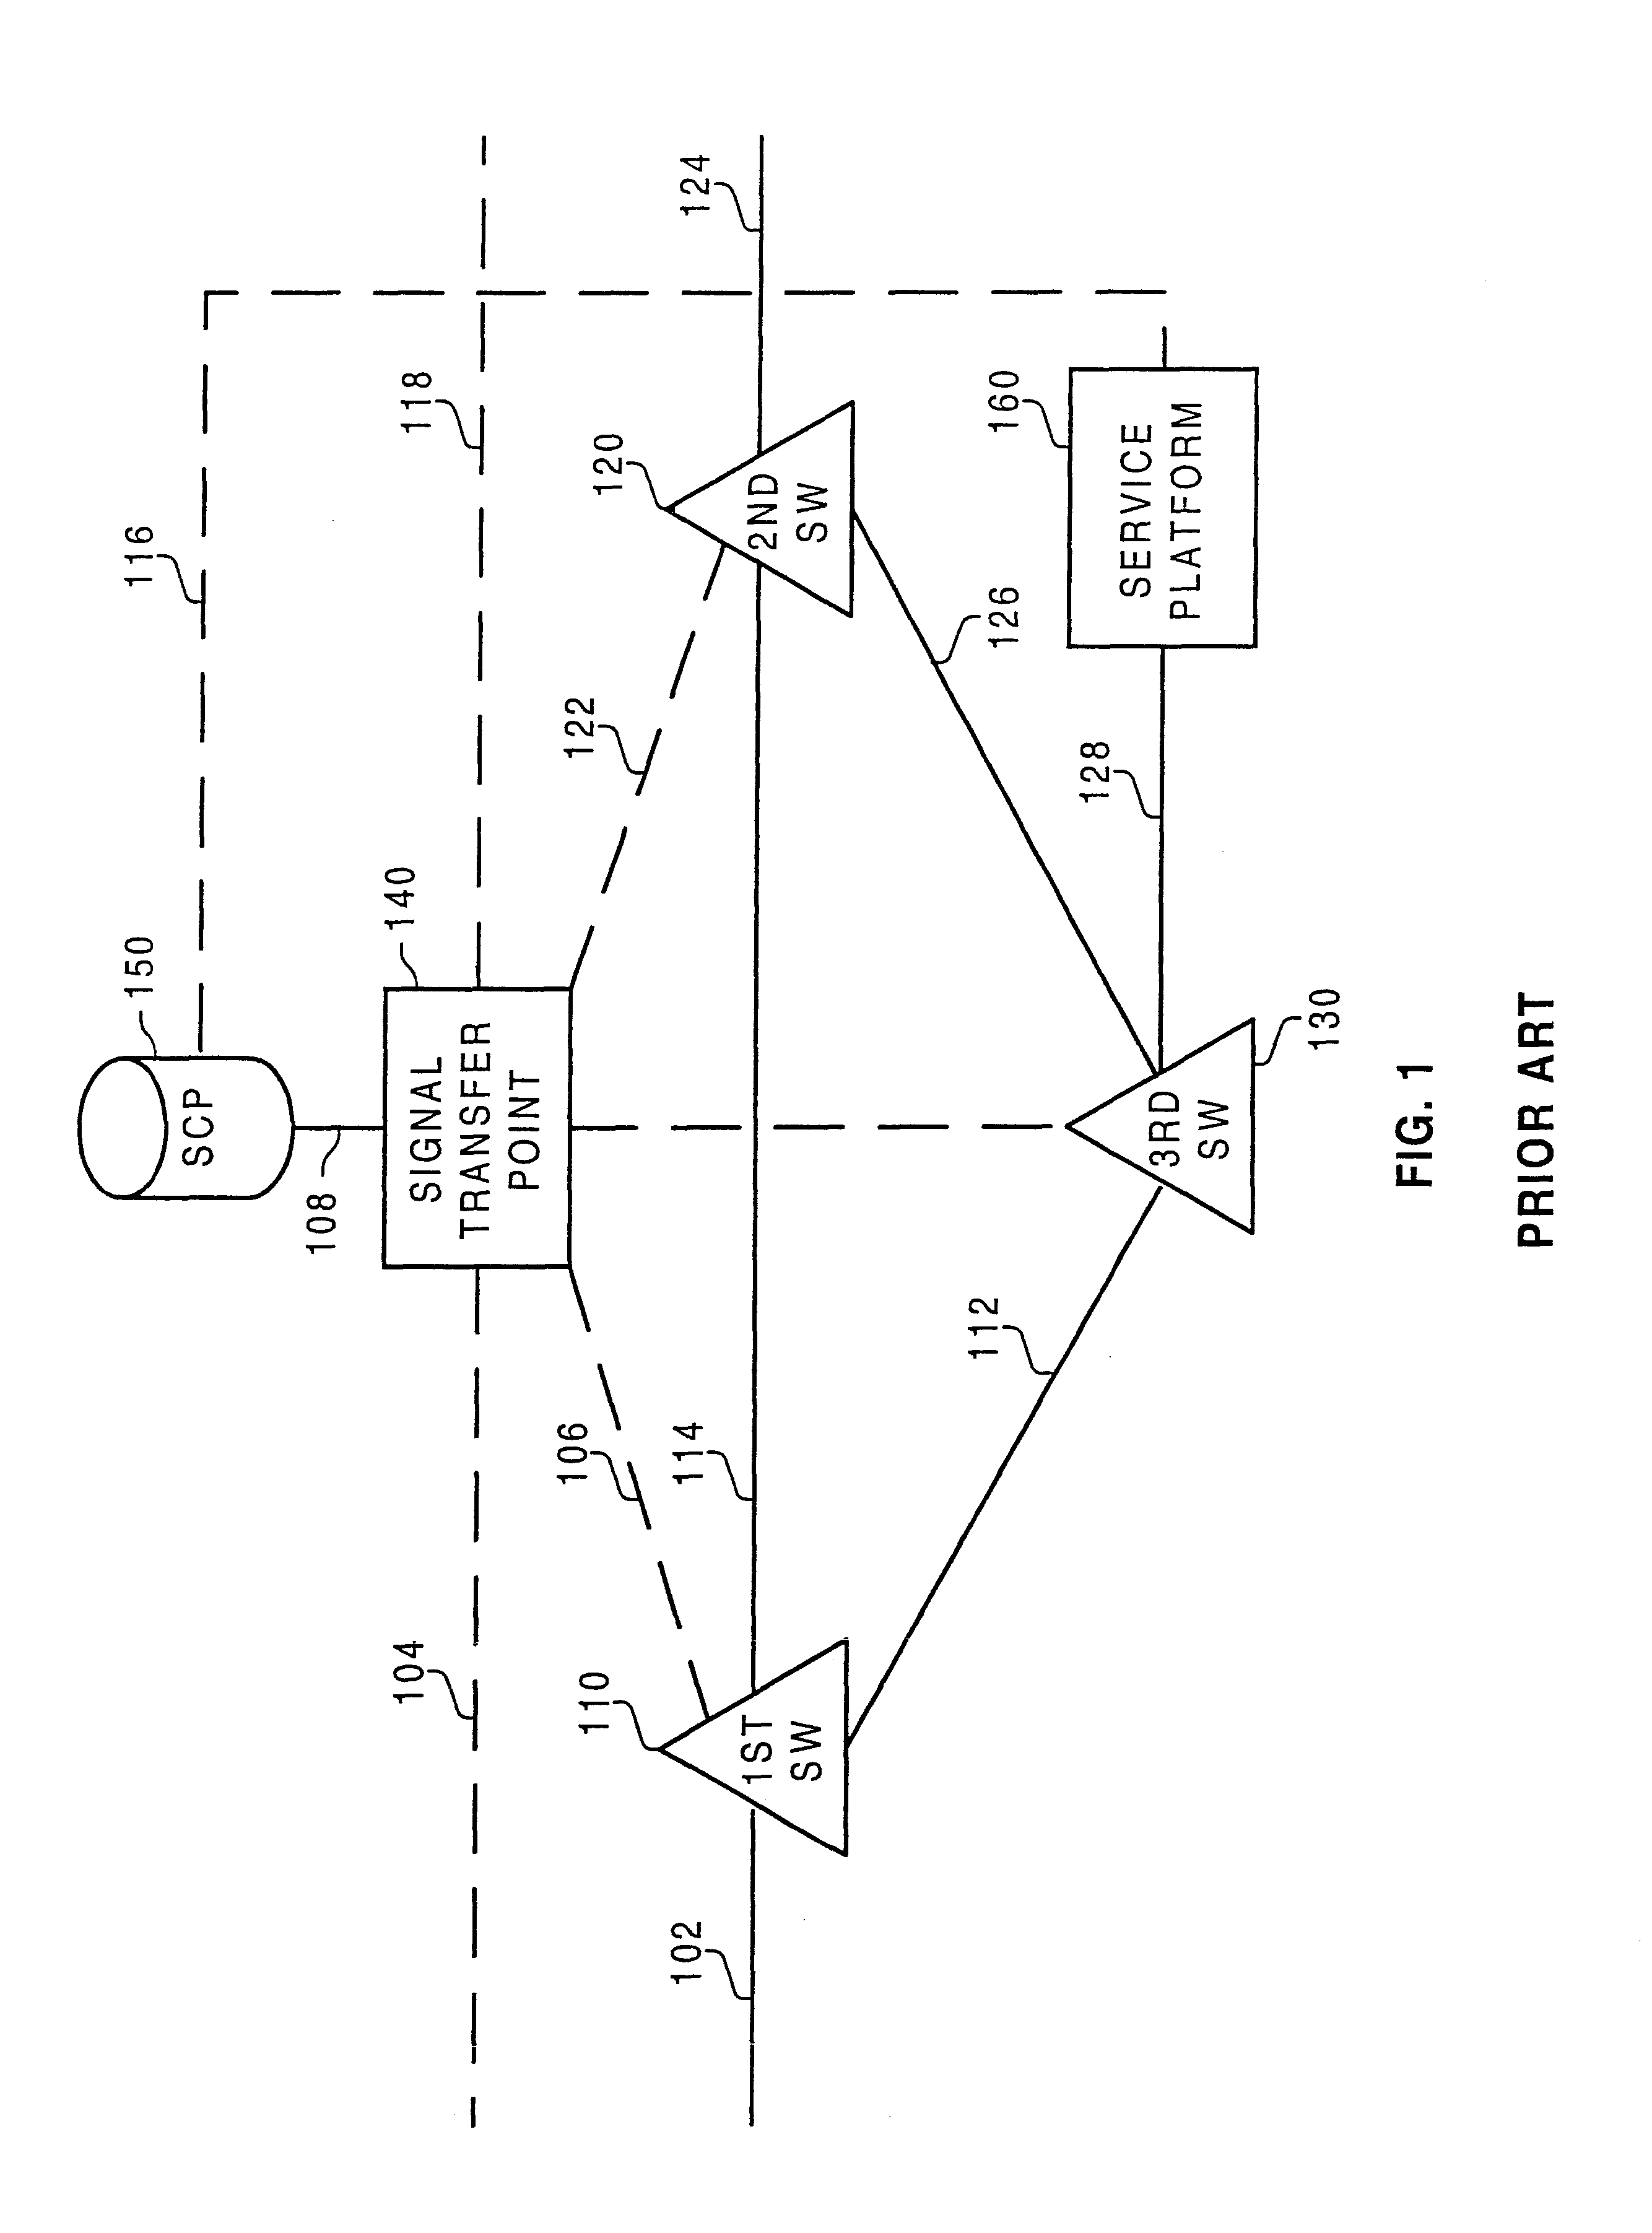 Method and apparatus for validating pre-pay and post-pay communication services using the same integrated database